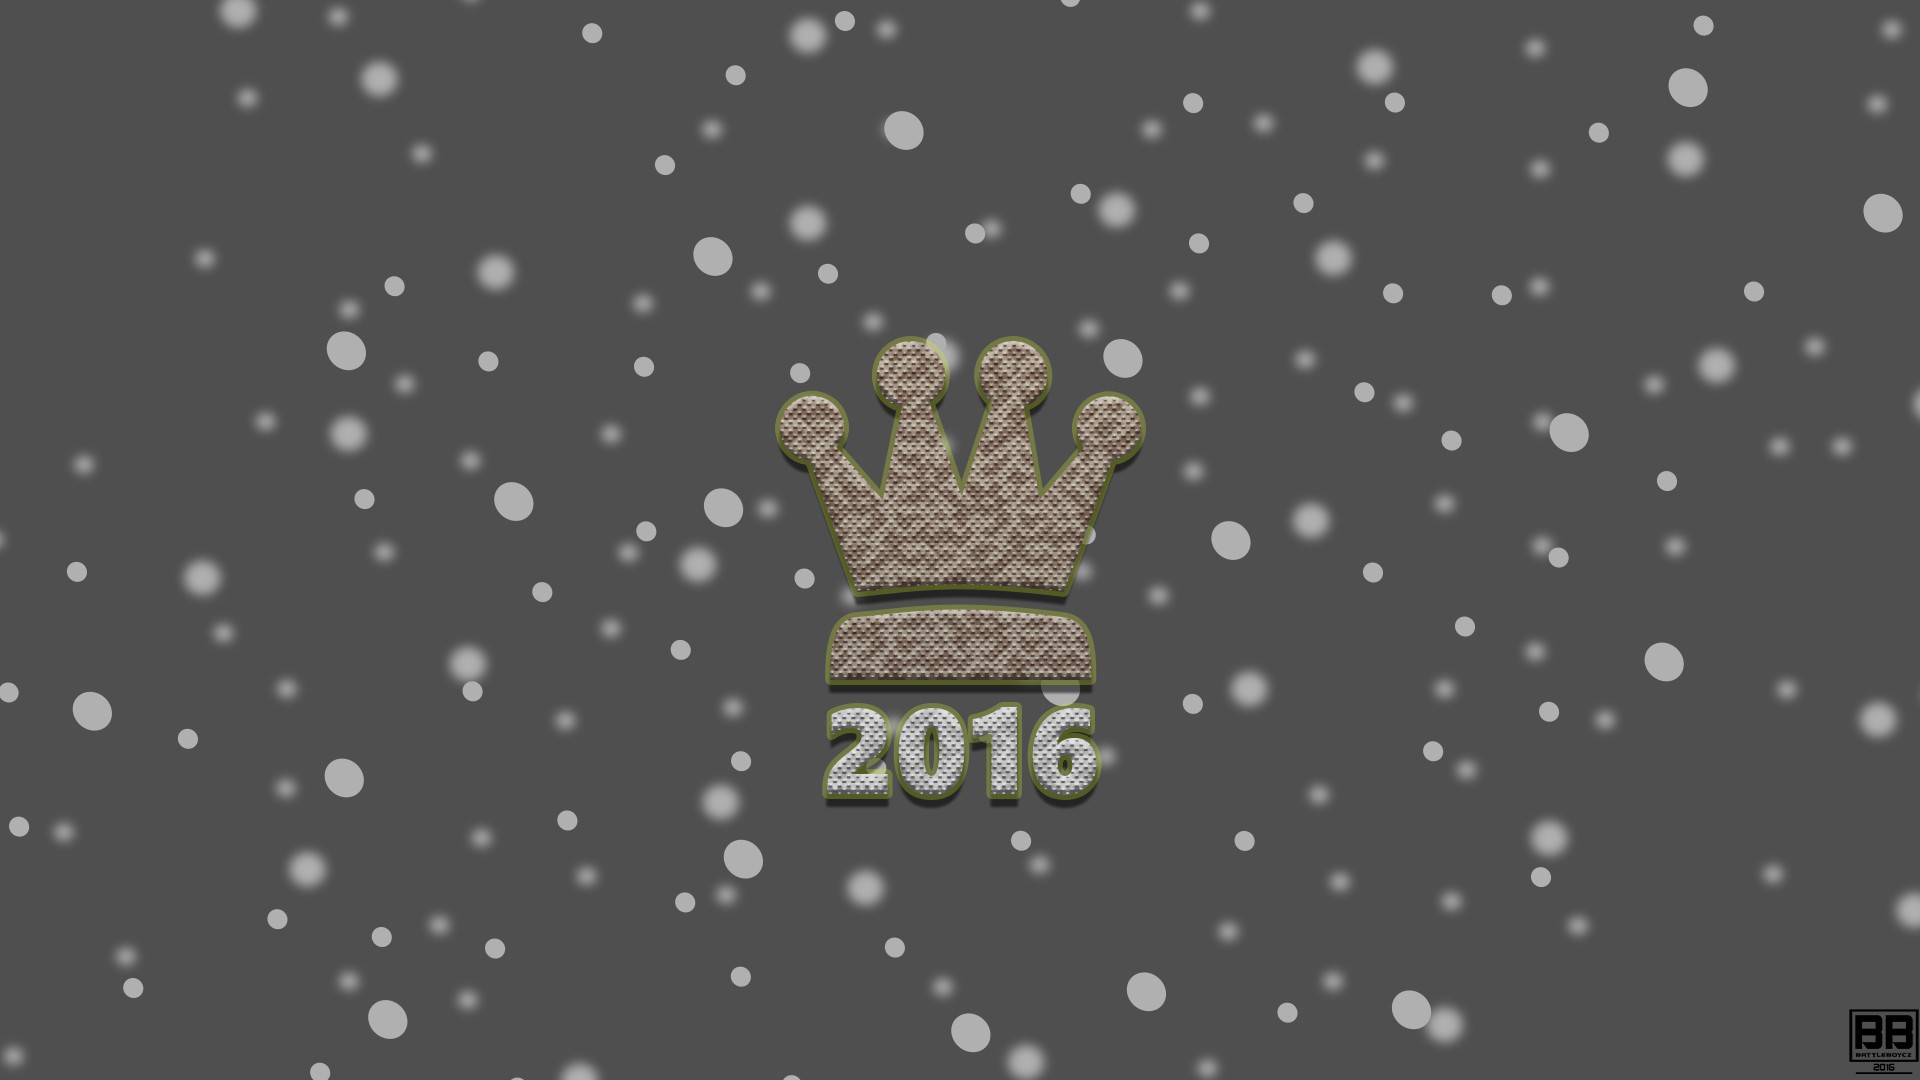 Snow Flakes King Graphic Design Typography New Year Crown 1920x1080